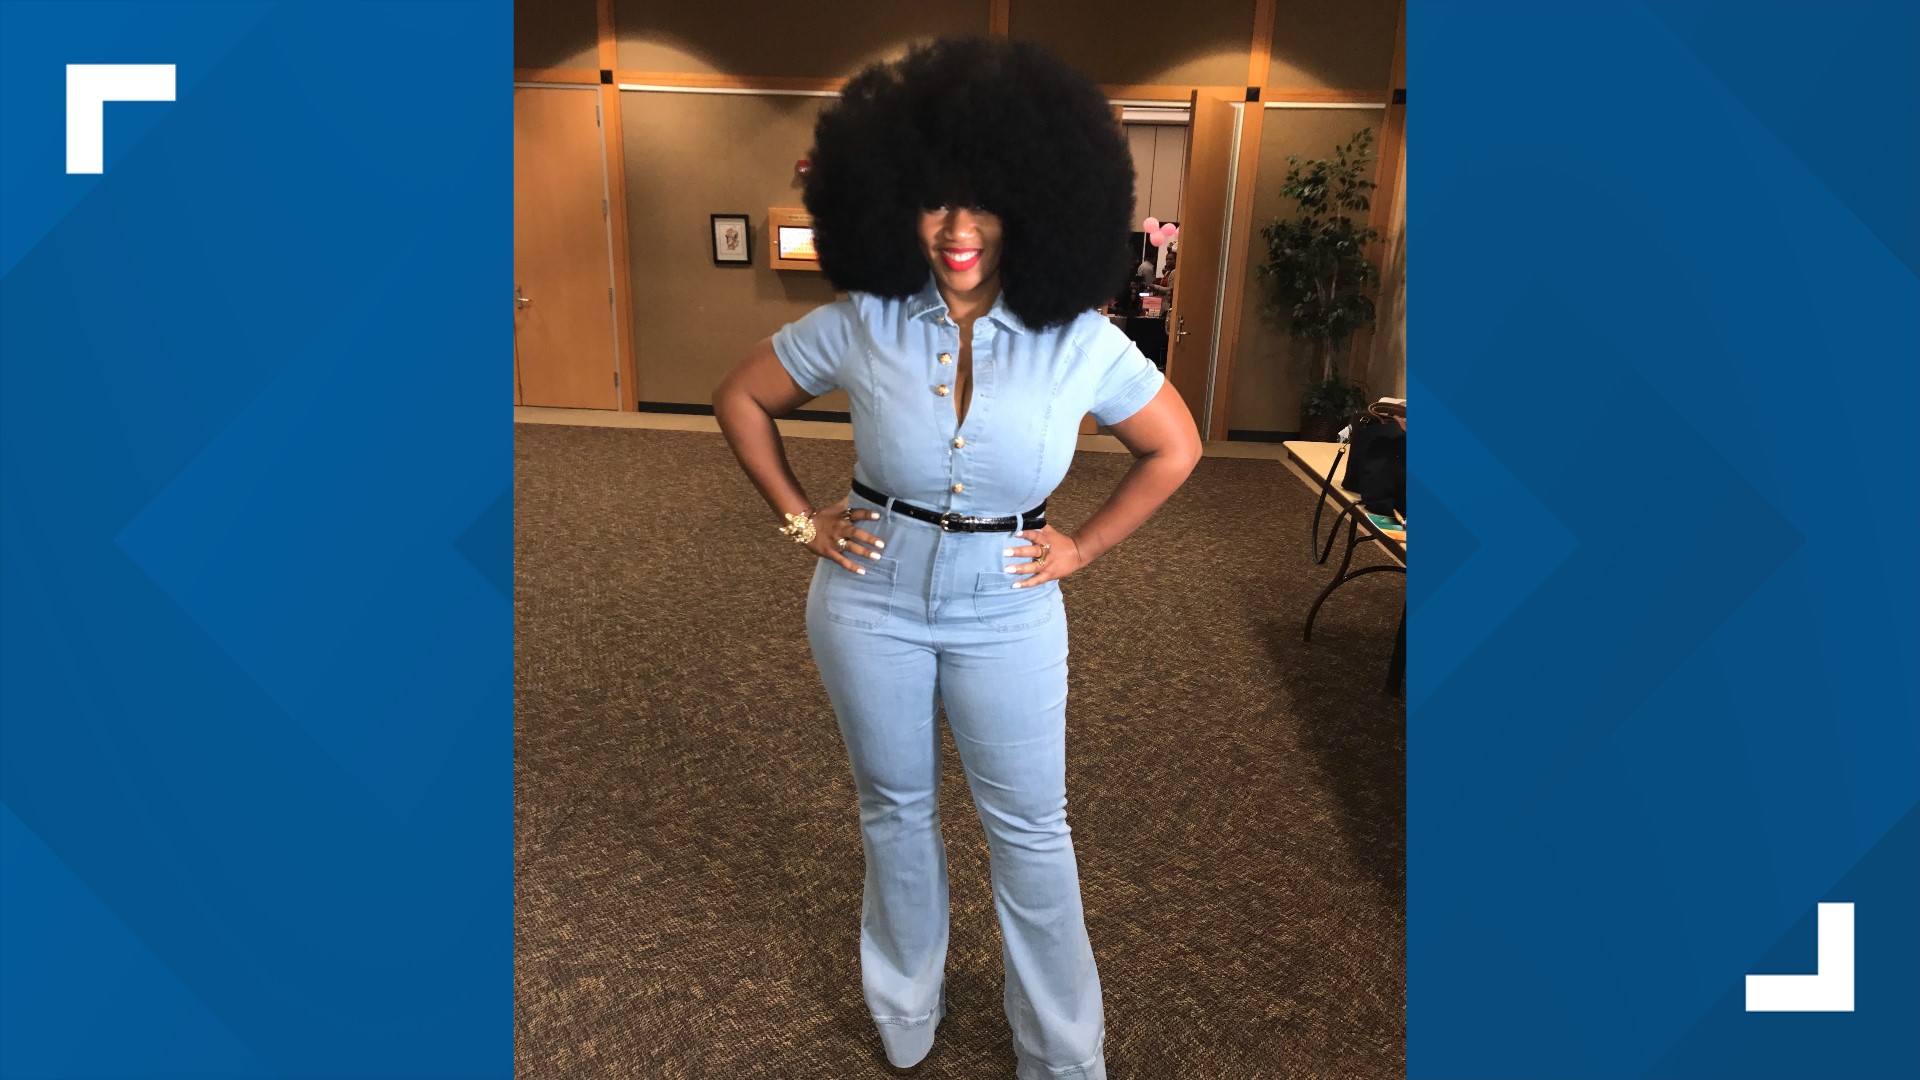 Aevin Dugas' biggest afro in the world sets another Guinness record